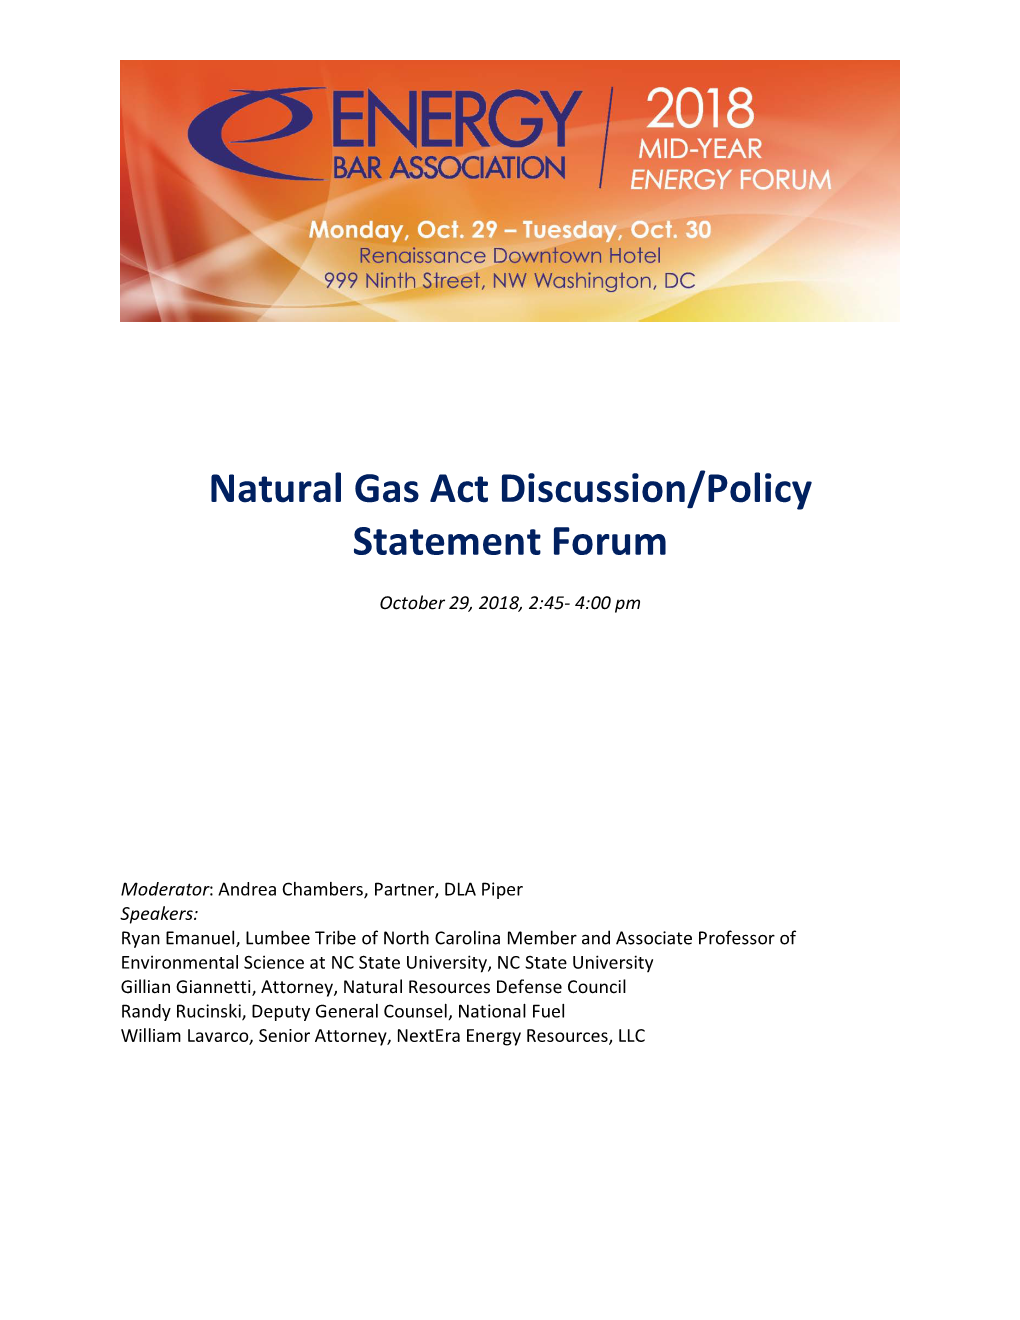 Natural Gas Act Discussion/Policy Statement Forum